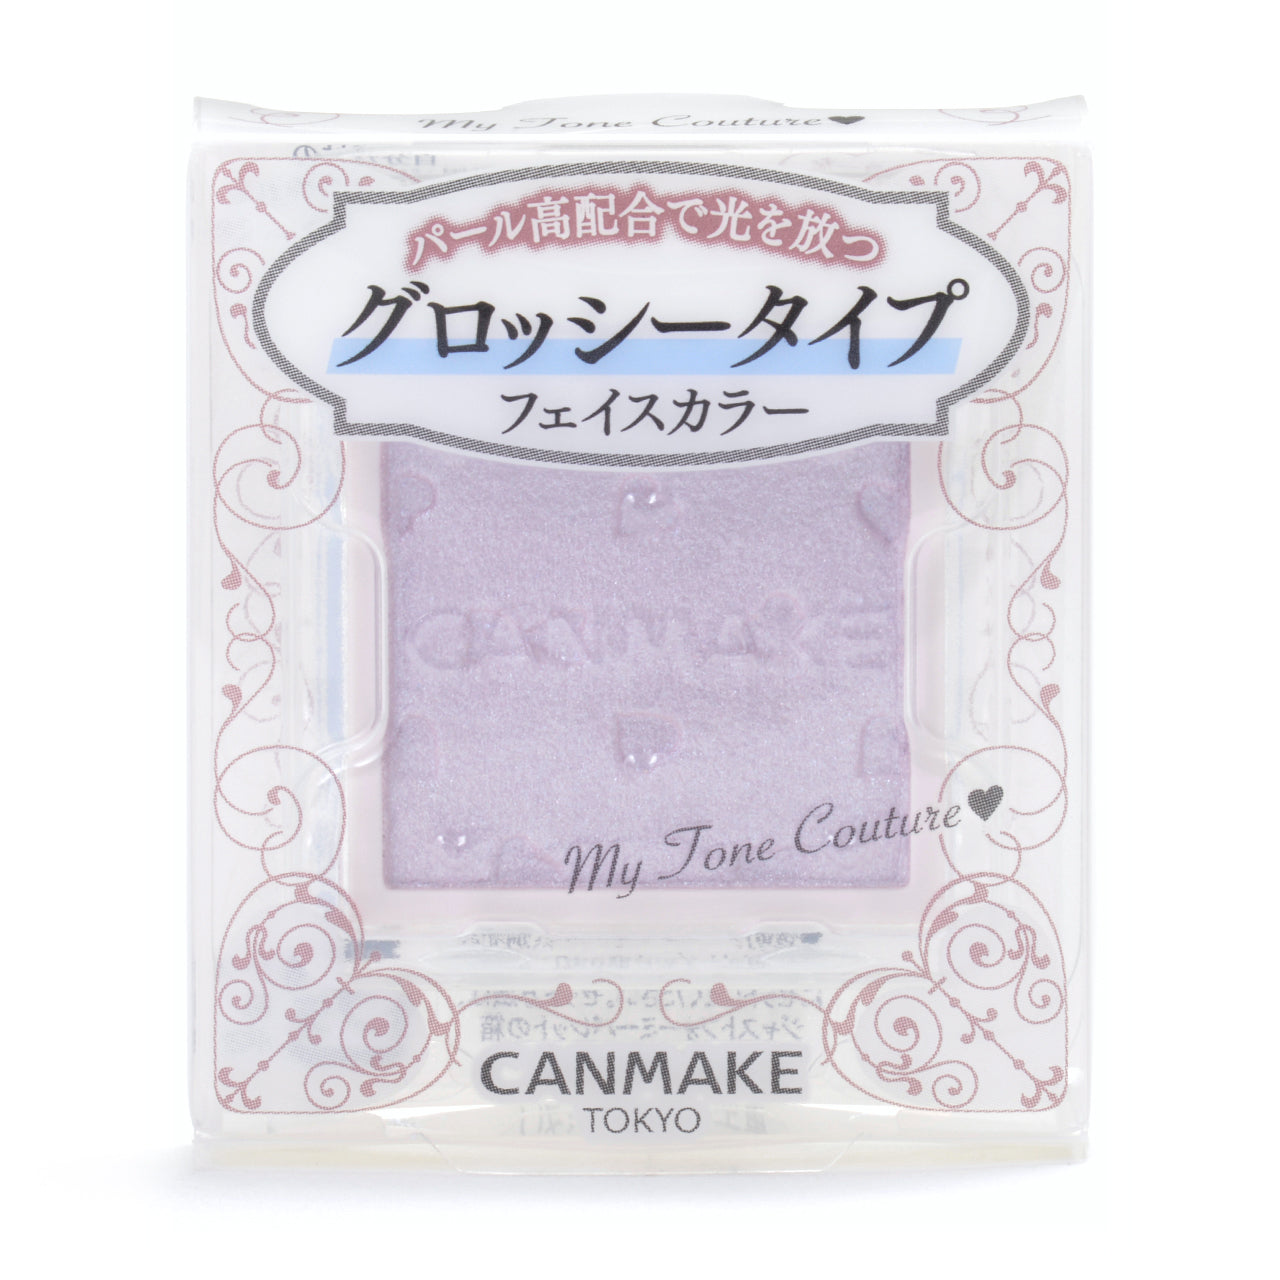 CANMAKE My Tone Couture (Glossy Type)